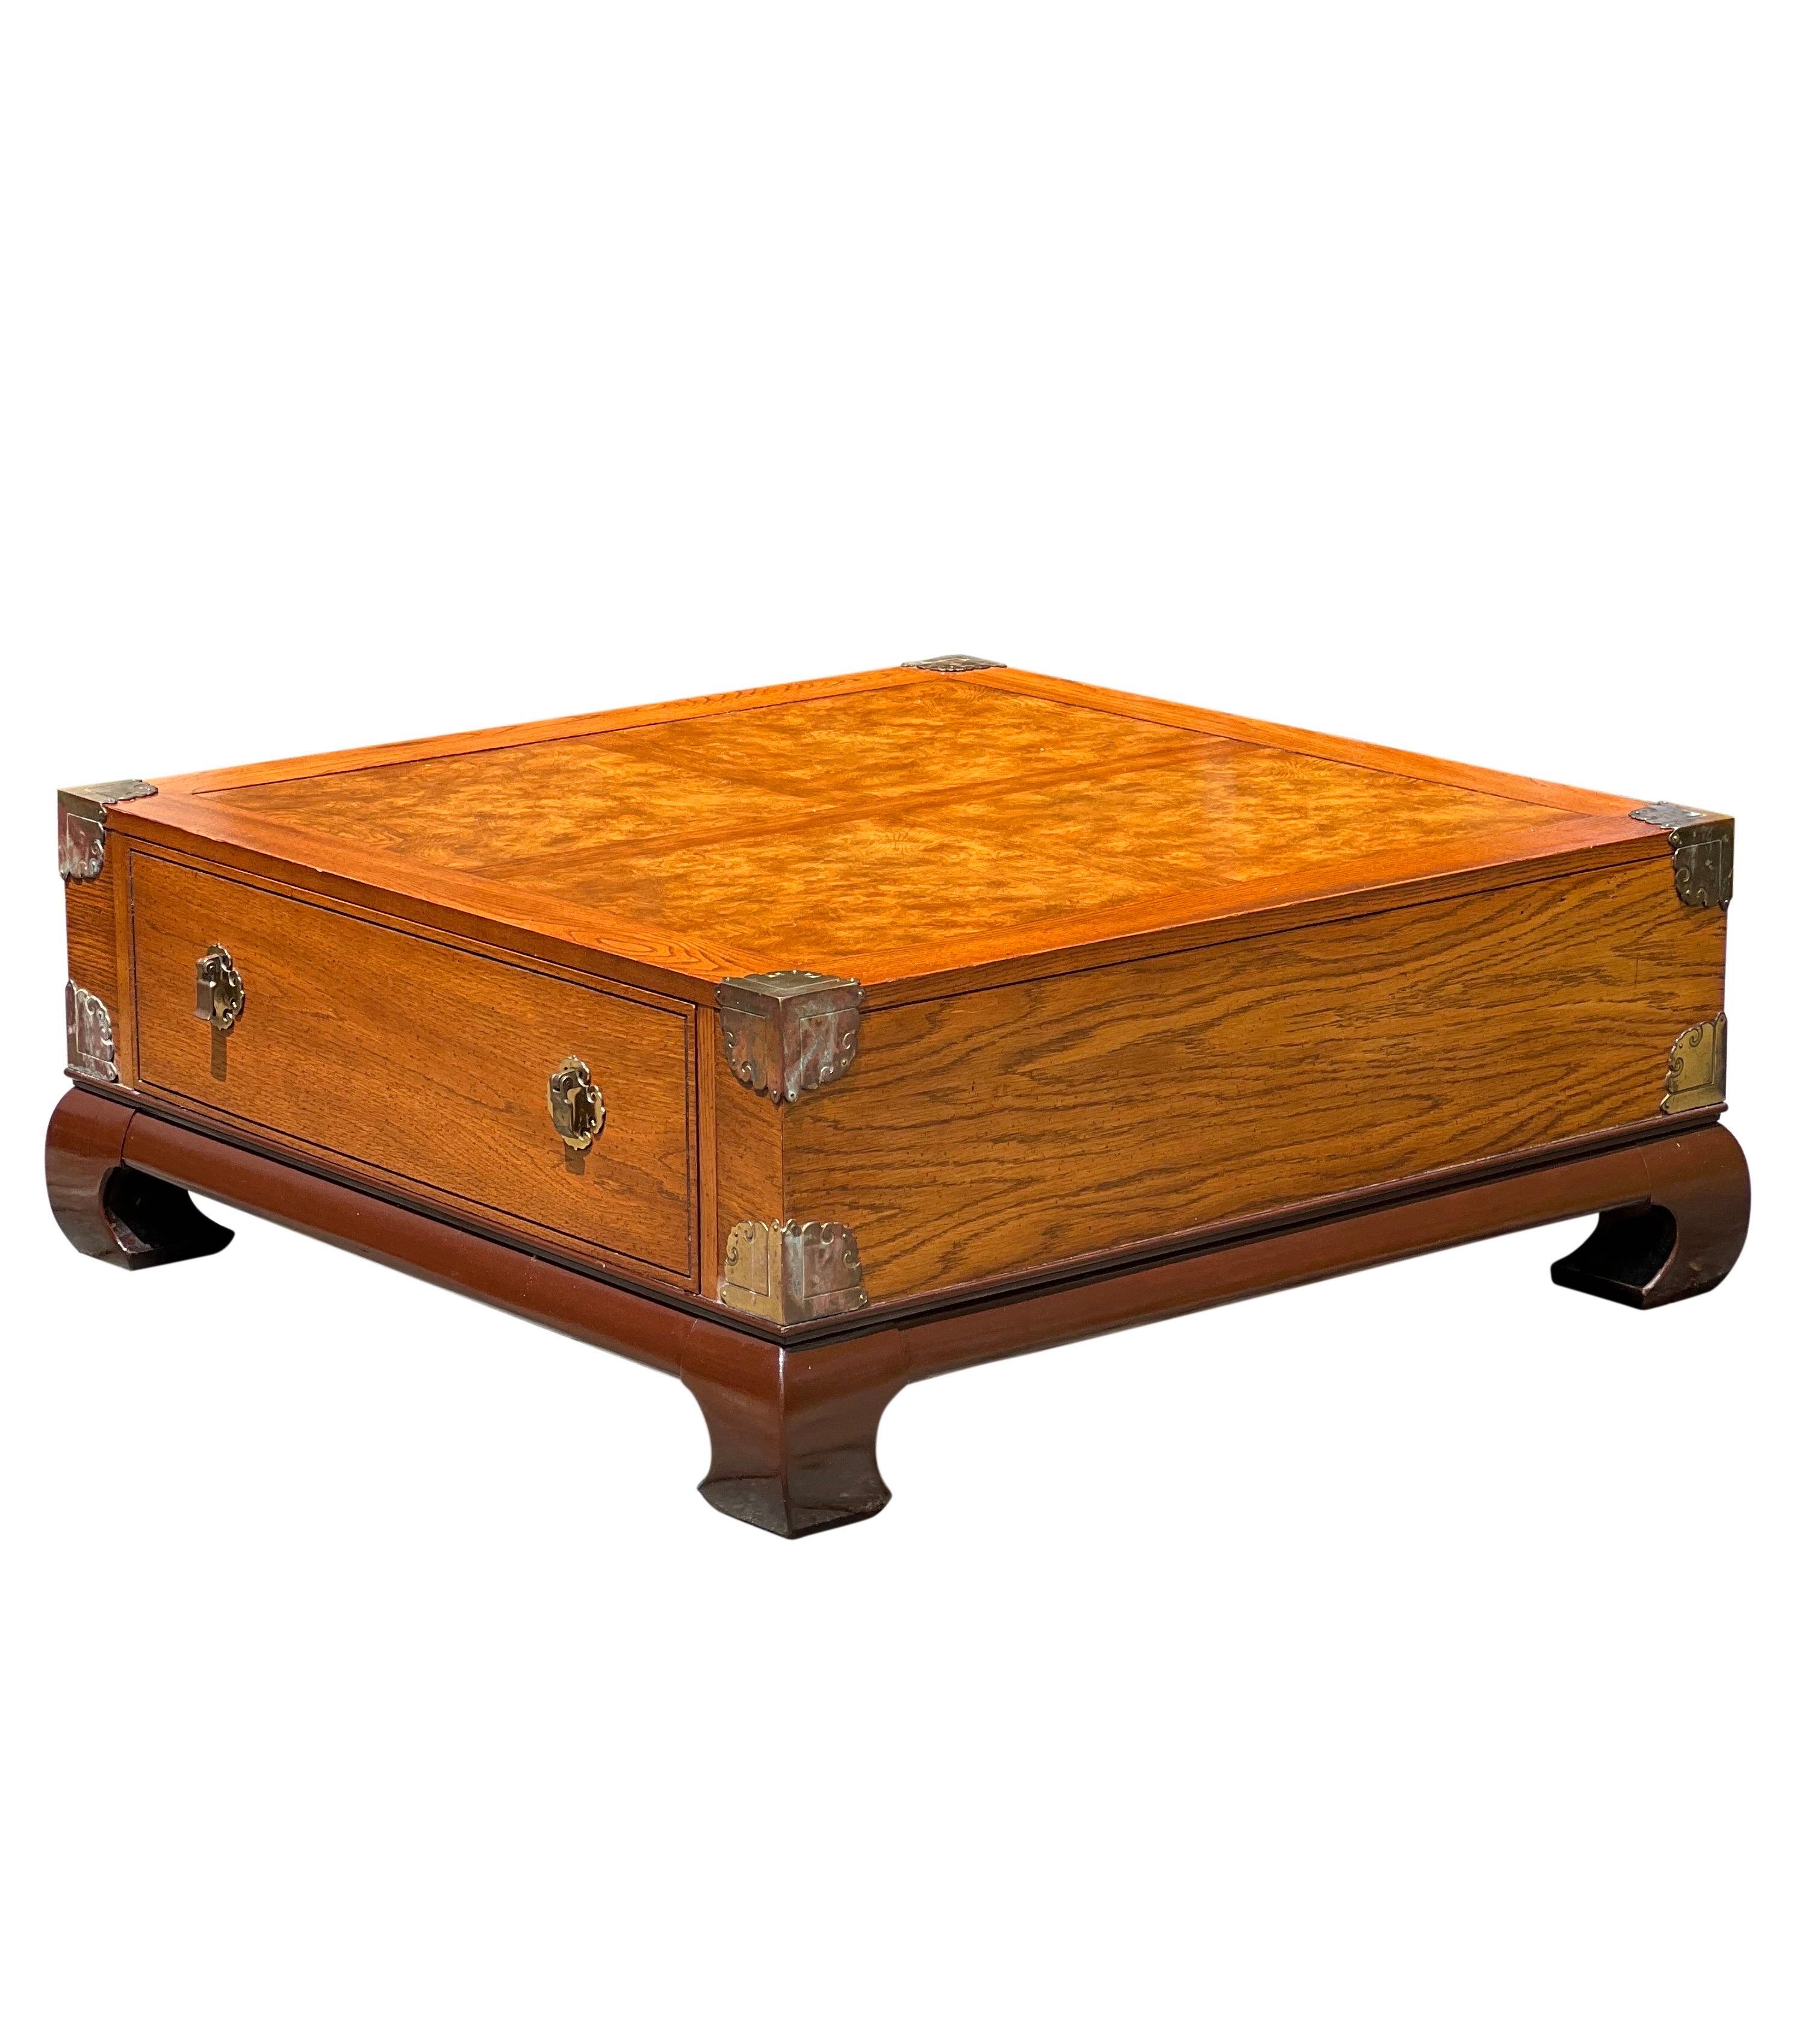 Vintage Bassett Asian style burl coffee table with brass accents, 1970s.

This impressive table is adorned with chunky brass corner accents with great patina and a beautiful burl top. It features a large, single dovetailed drawer in clean condition